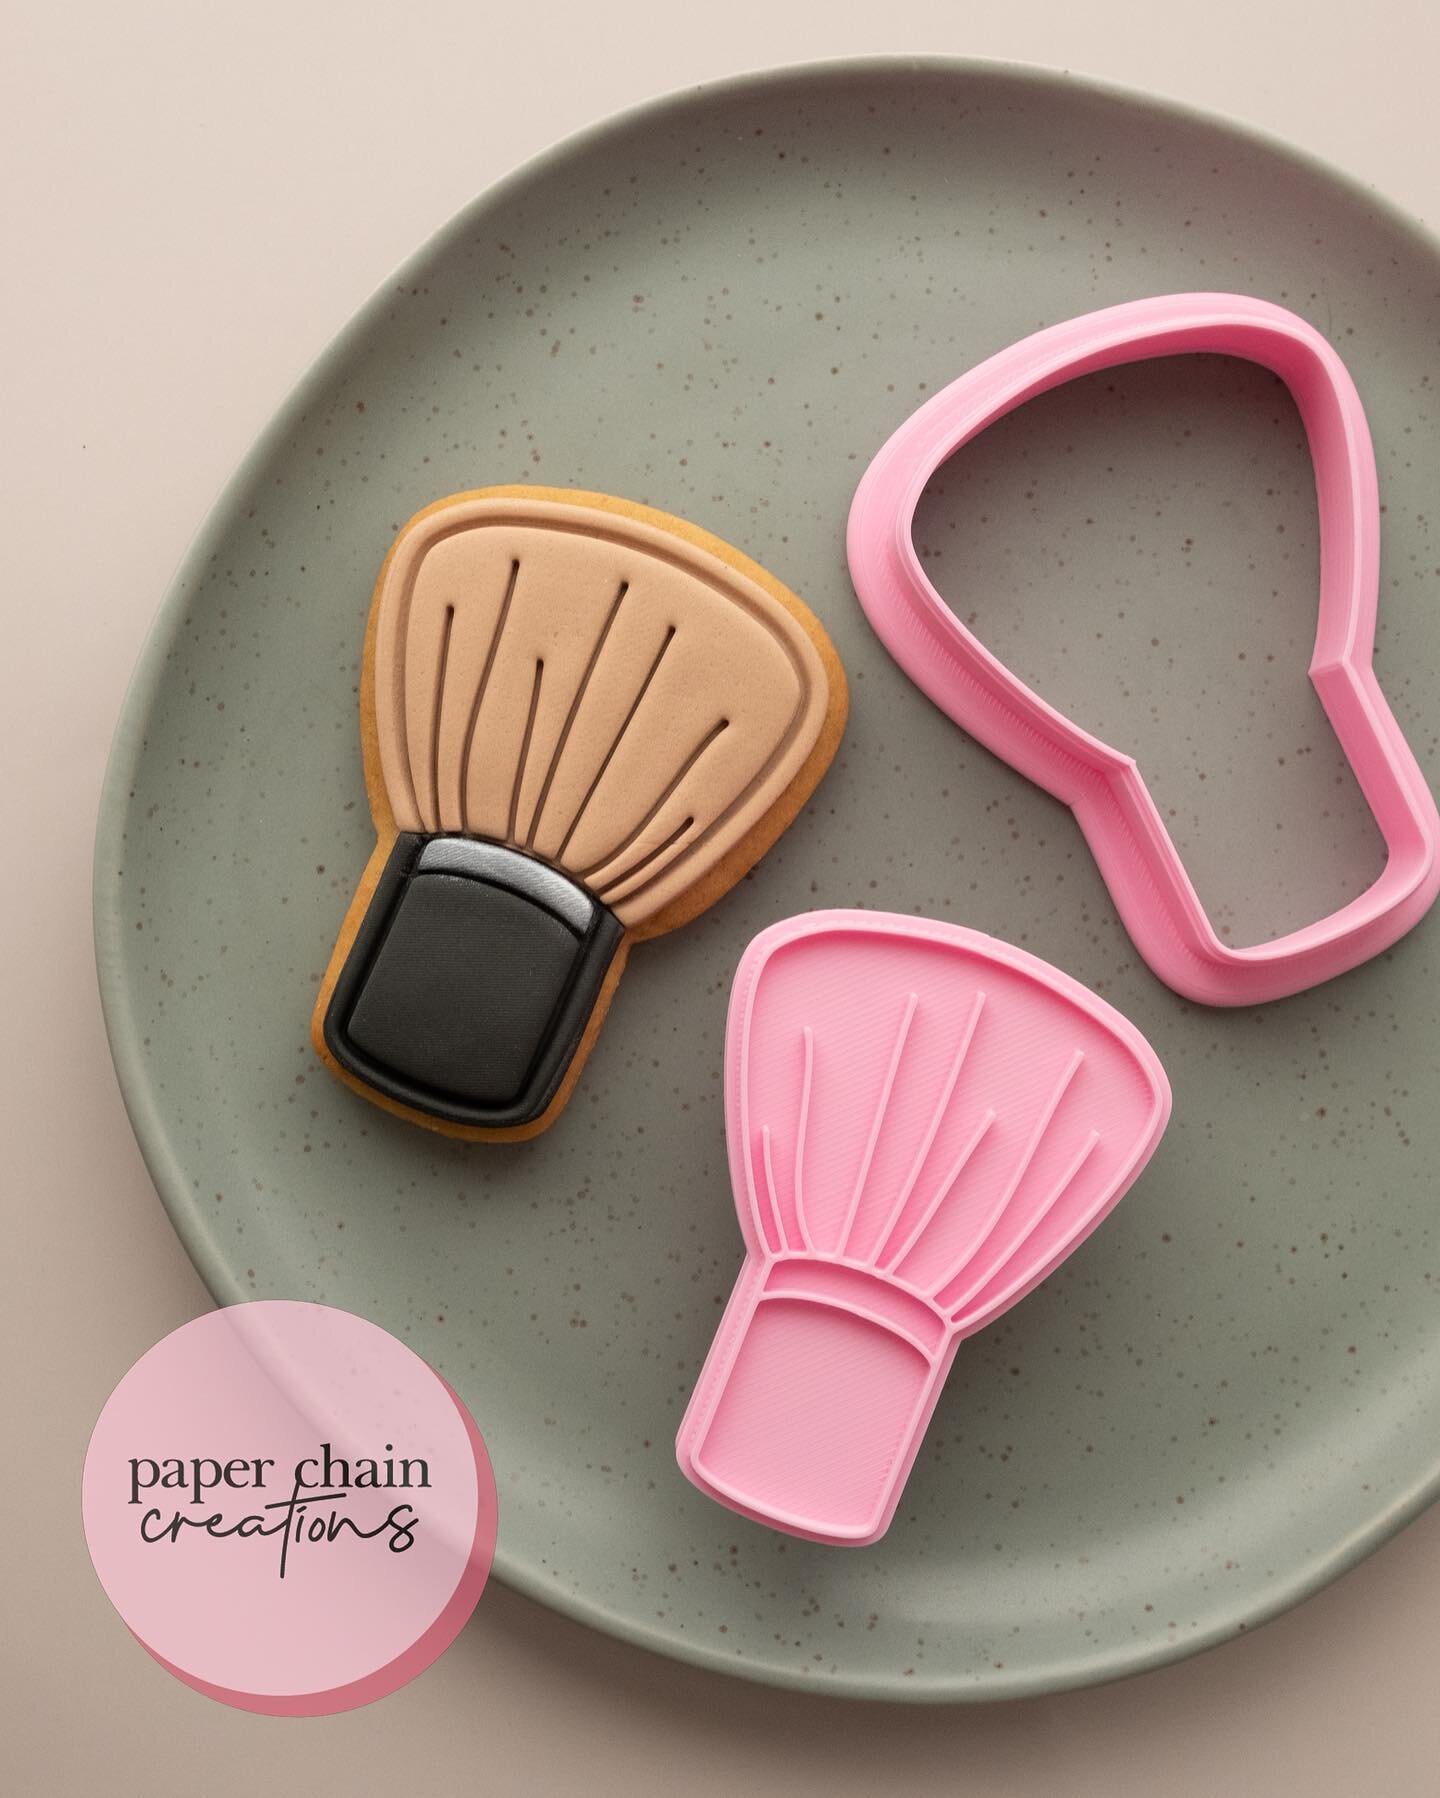 💕make up brush💕
.
Absolutely love how the make up cookie cutters and embossers I designed for Mother&rsquo;s Day turned out! 
.
I&rsquo;m currently working through my list of new ideas and Father&rsquo;s Day designs so if you have any you want adde